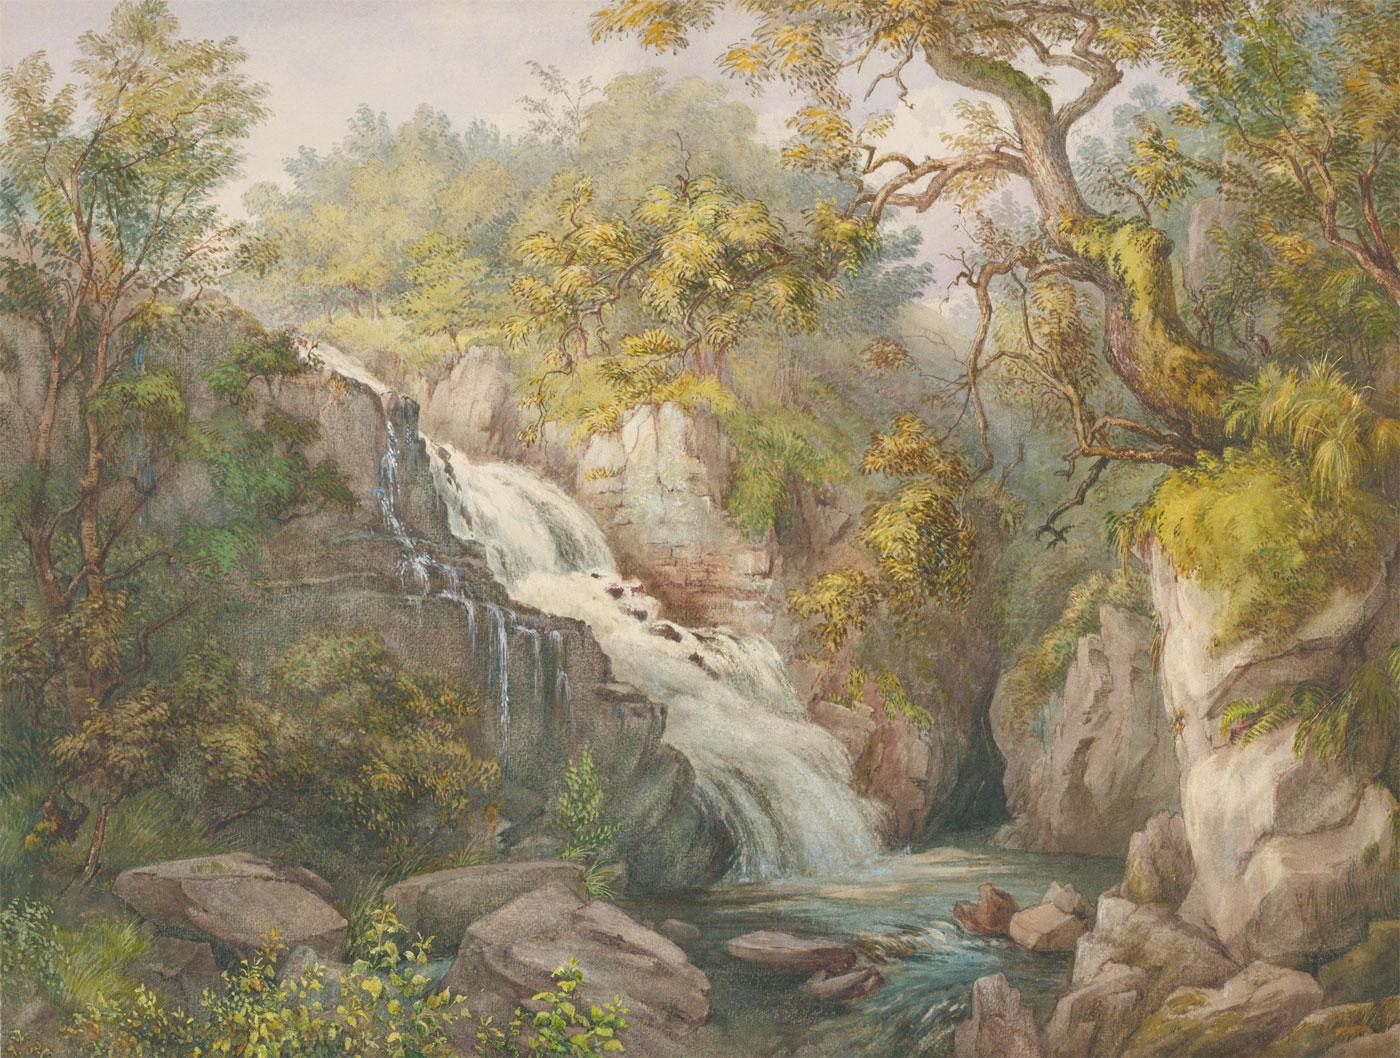 Unknown Landscape Art - L. Drayton - 19th Century Watercolour, Waterfall between Rocky Crags